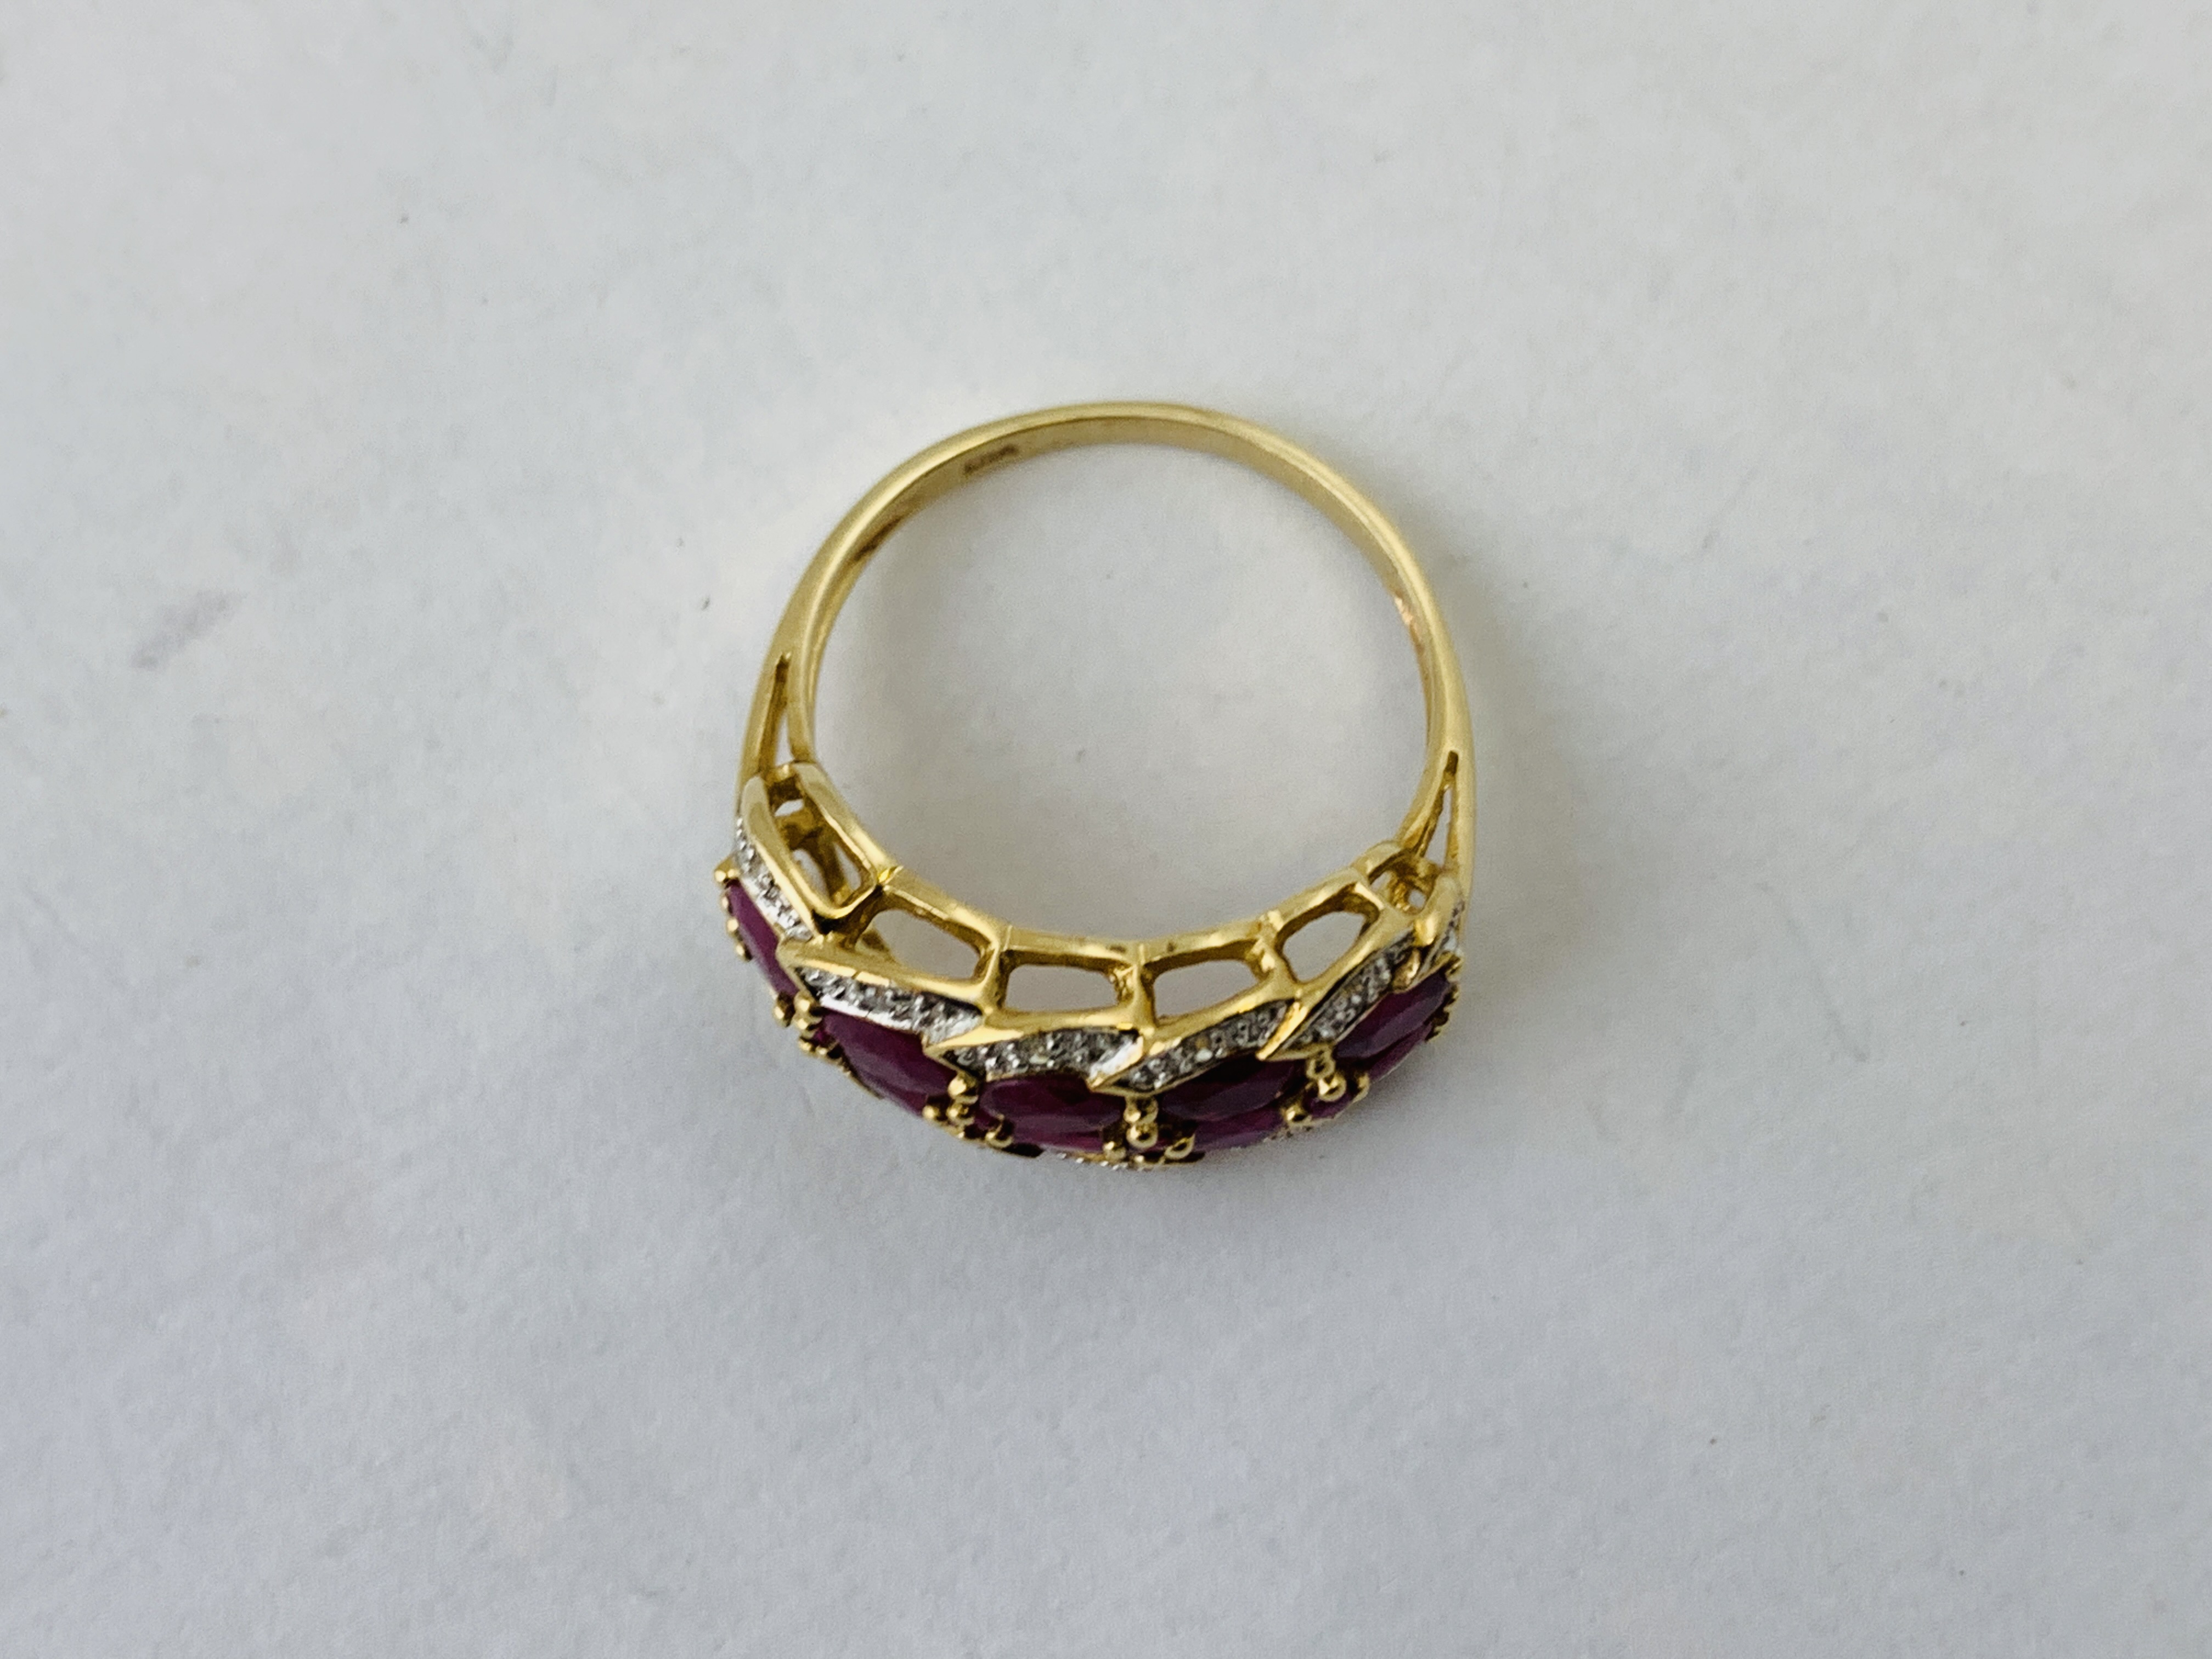 LADIES 9CT GOLD RUBY AND DIAMOND RING THE 10 PRINCIPLE RUBY'S SURROUNDED BY DIAMOND CHIPS SIZE Q/R - Image 3 of 7